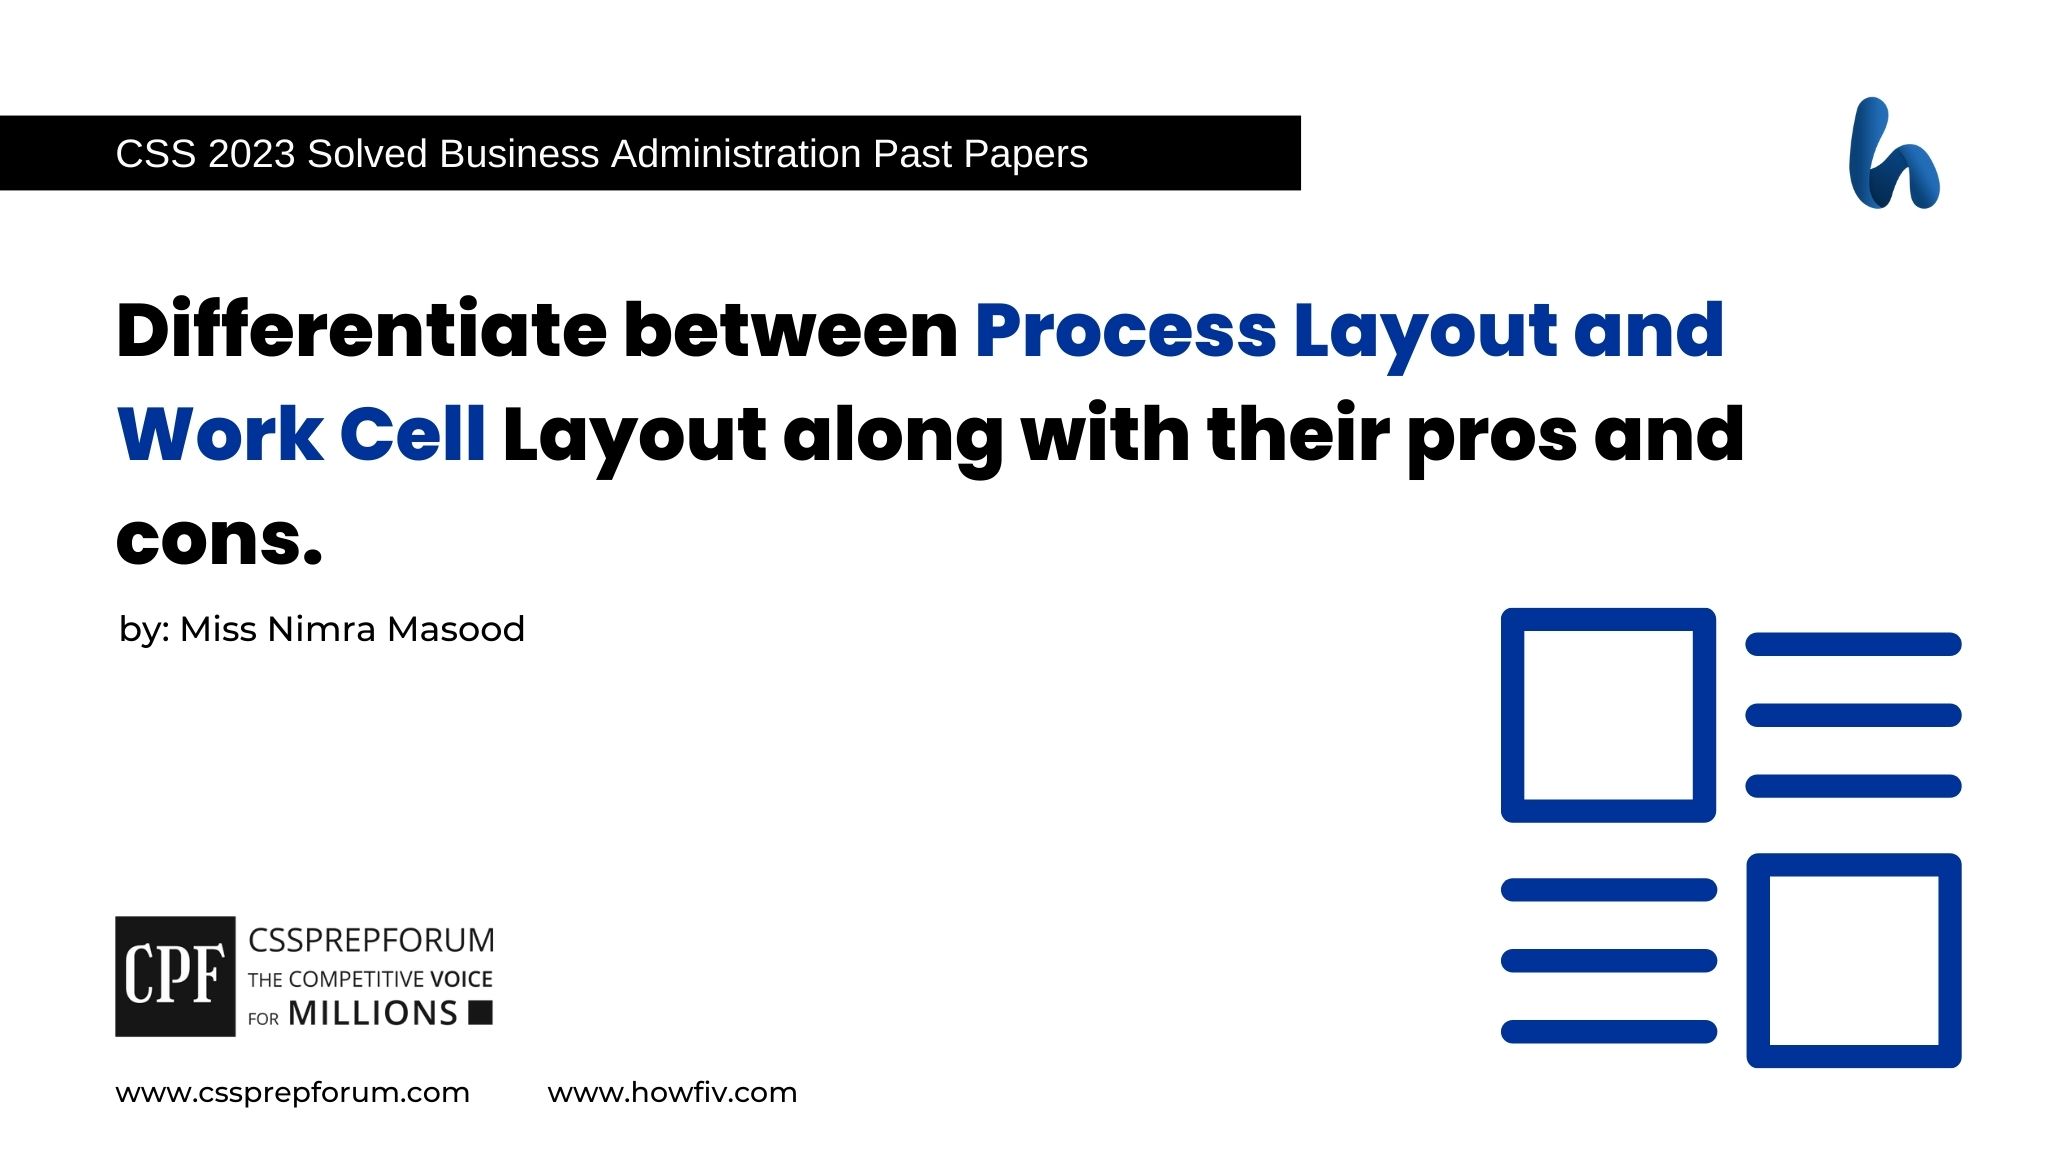 Differentiate between Process Layout and Work Cell Layout along with their pros and cons.